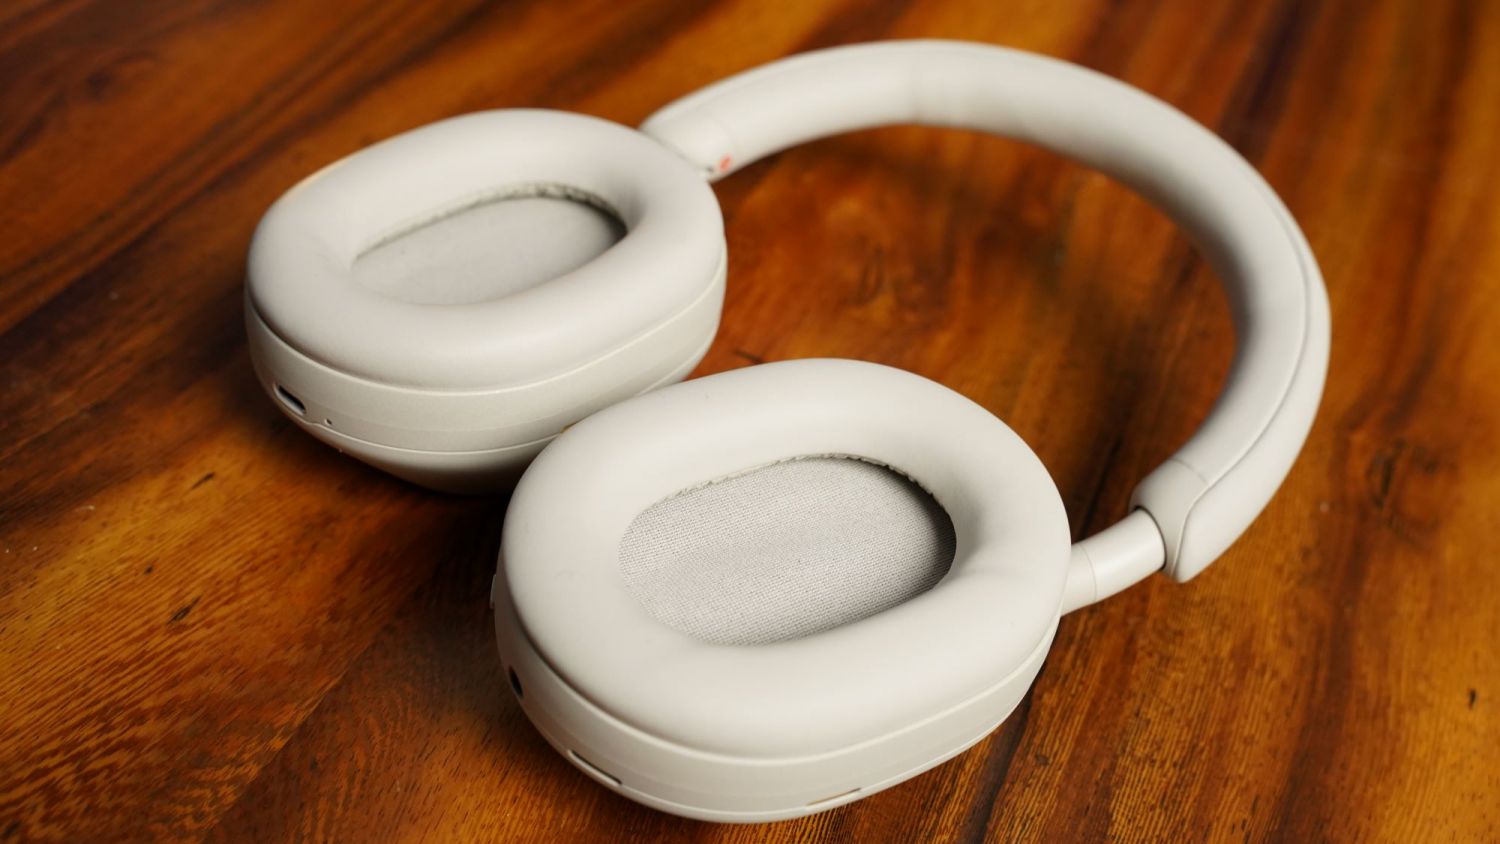 Geek Review: Sony WH-1000XM5 Wireless Noise-Cancelling Headphones